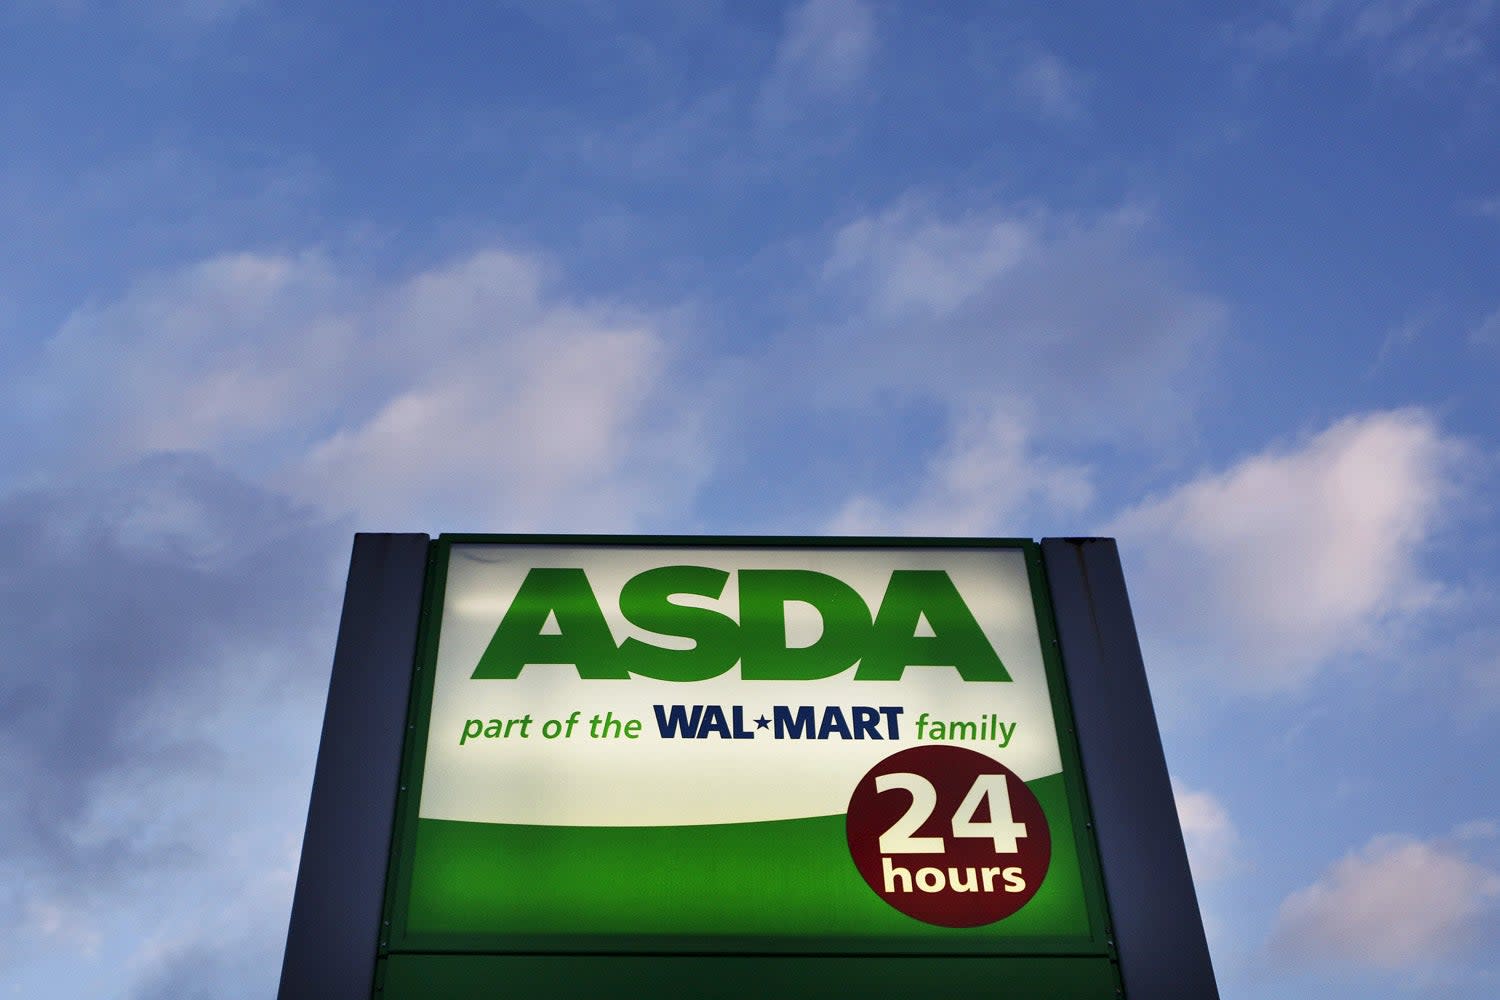 Asda becomes latest supermarket to hand back business rates relief